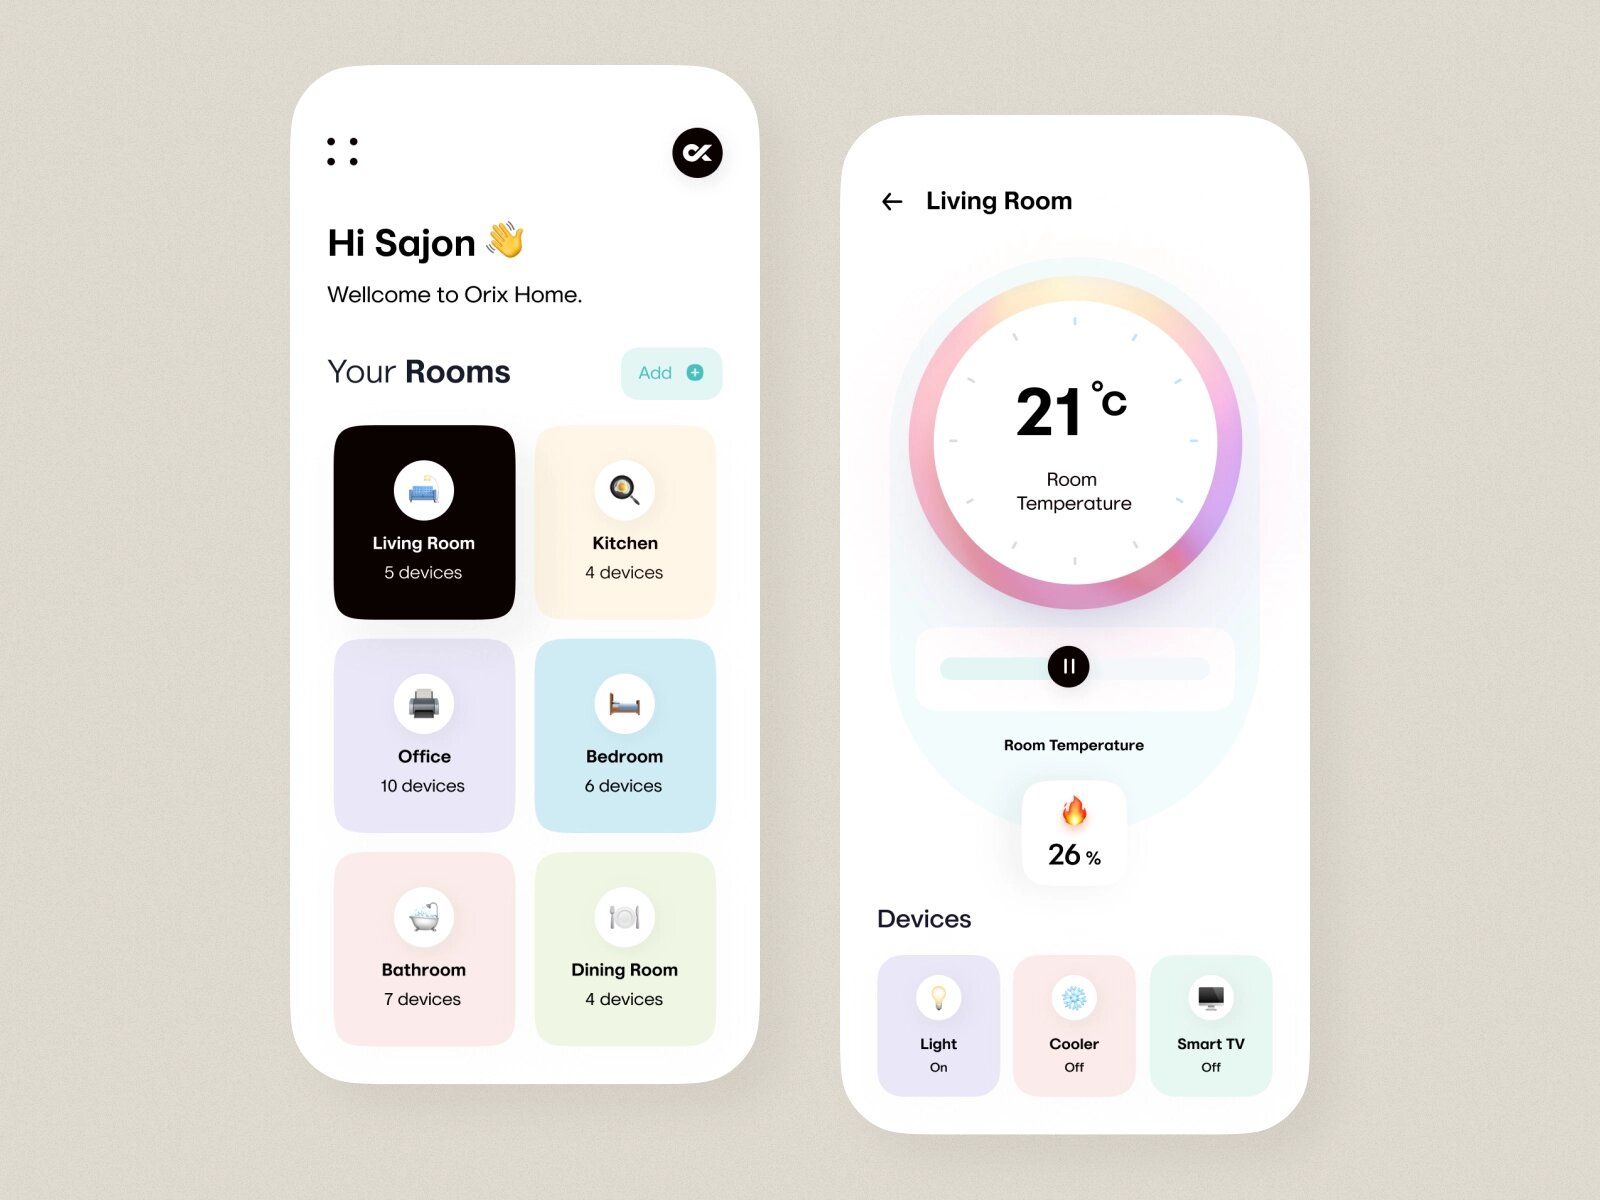 Smart home technology options for home automation include diverse software development types like smart home application (*image by [Sajon](https://dribbble.com/sajon){ rel="nofollow" target="_blank" .default-md}*)